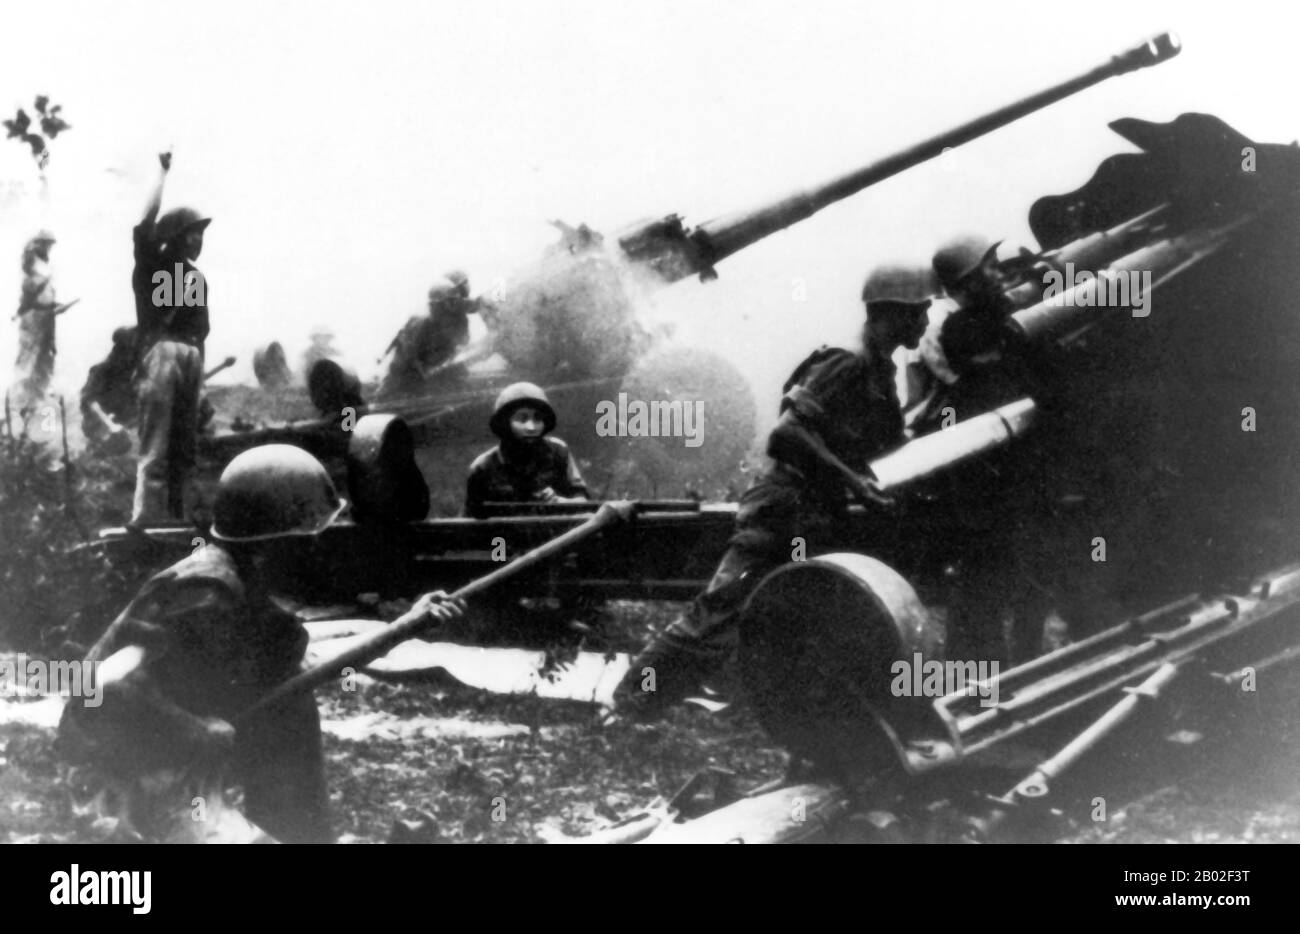 NVA Artillerymen fire their newly acquired Russian M46 (or Type 59 if built China) 130mm guns.  These guns were capable of providing deadly support for attacking infantry to a range of 27,000 meters, outranging the US 155mm and 8 inch  howitzers. Stock Photo